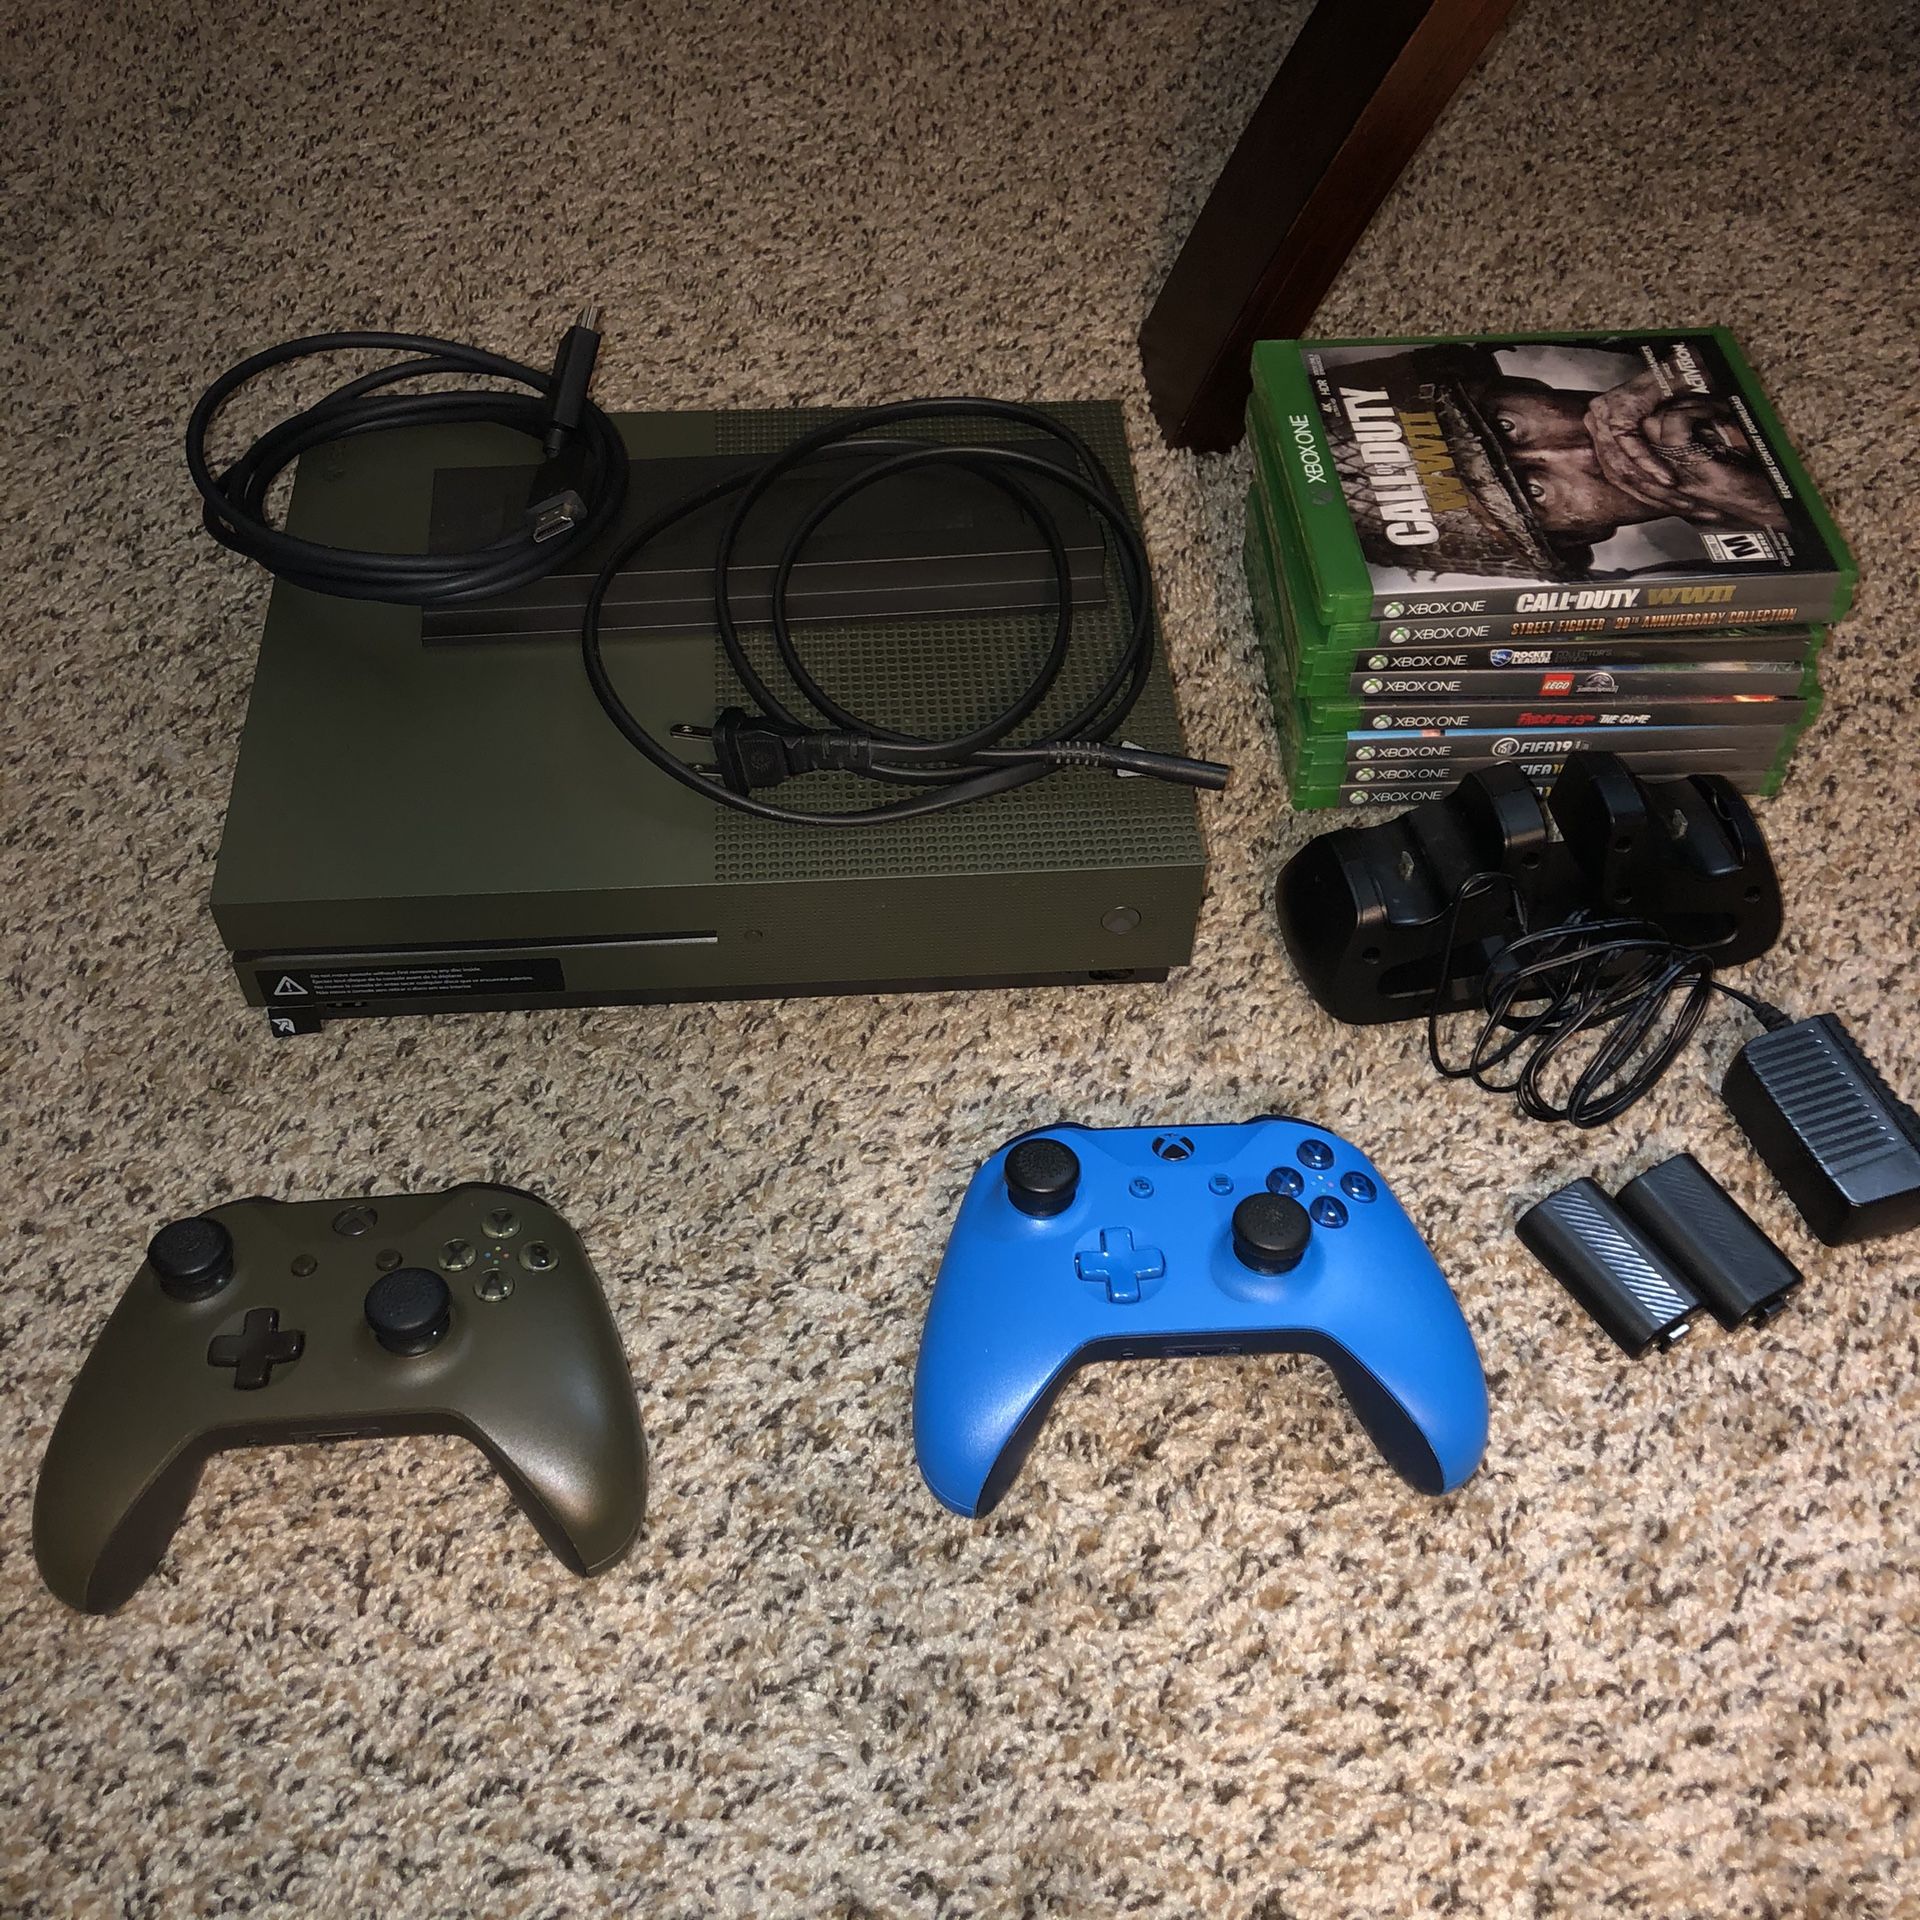 Xbox One S 1TB with 2 controllers, charging station, and 8 games